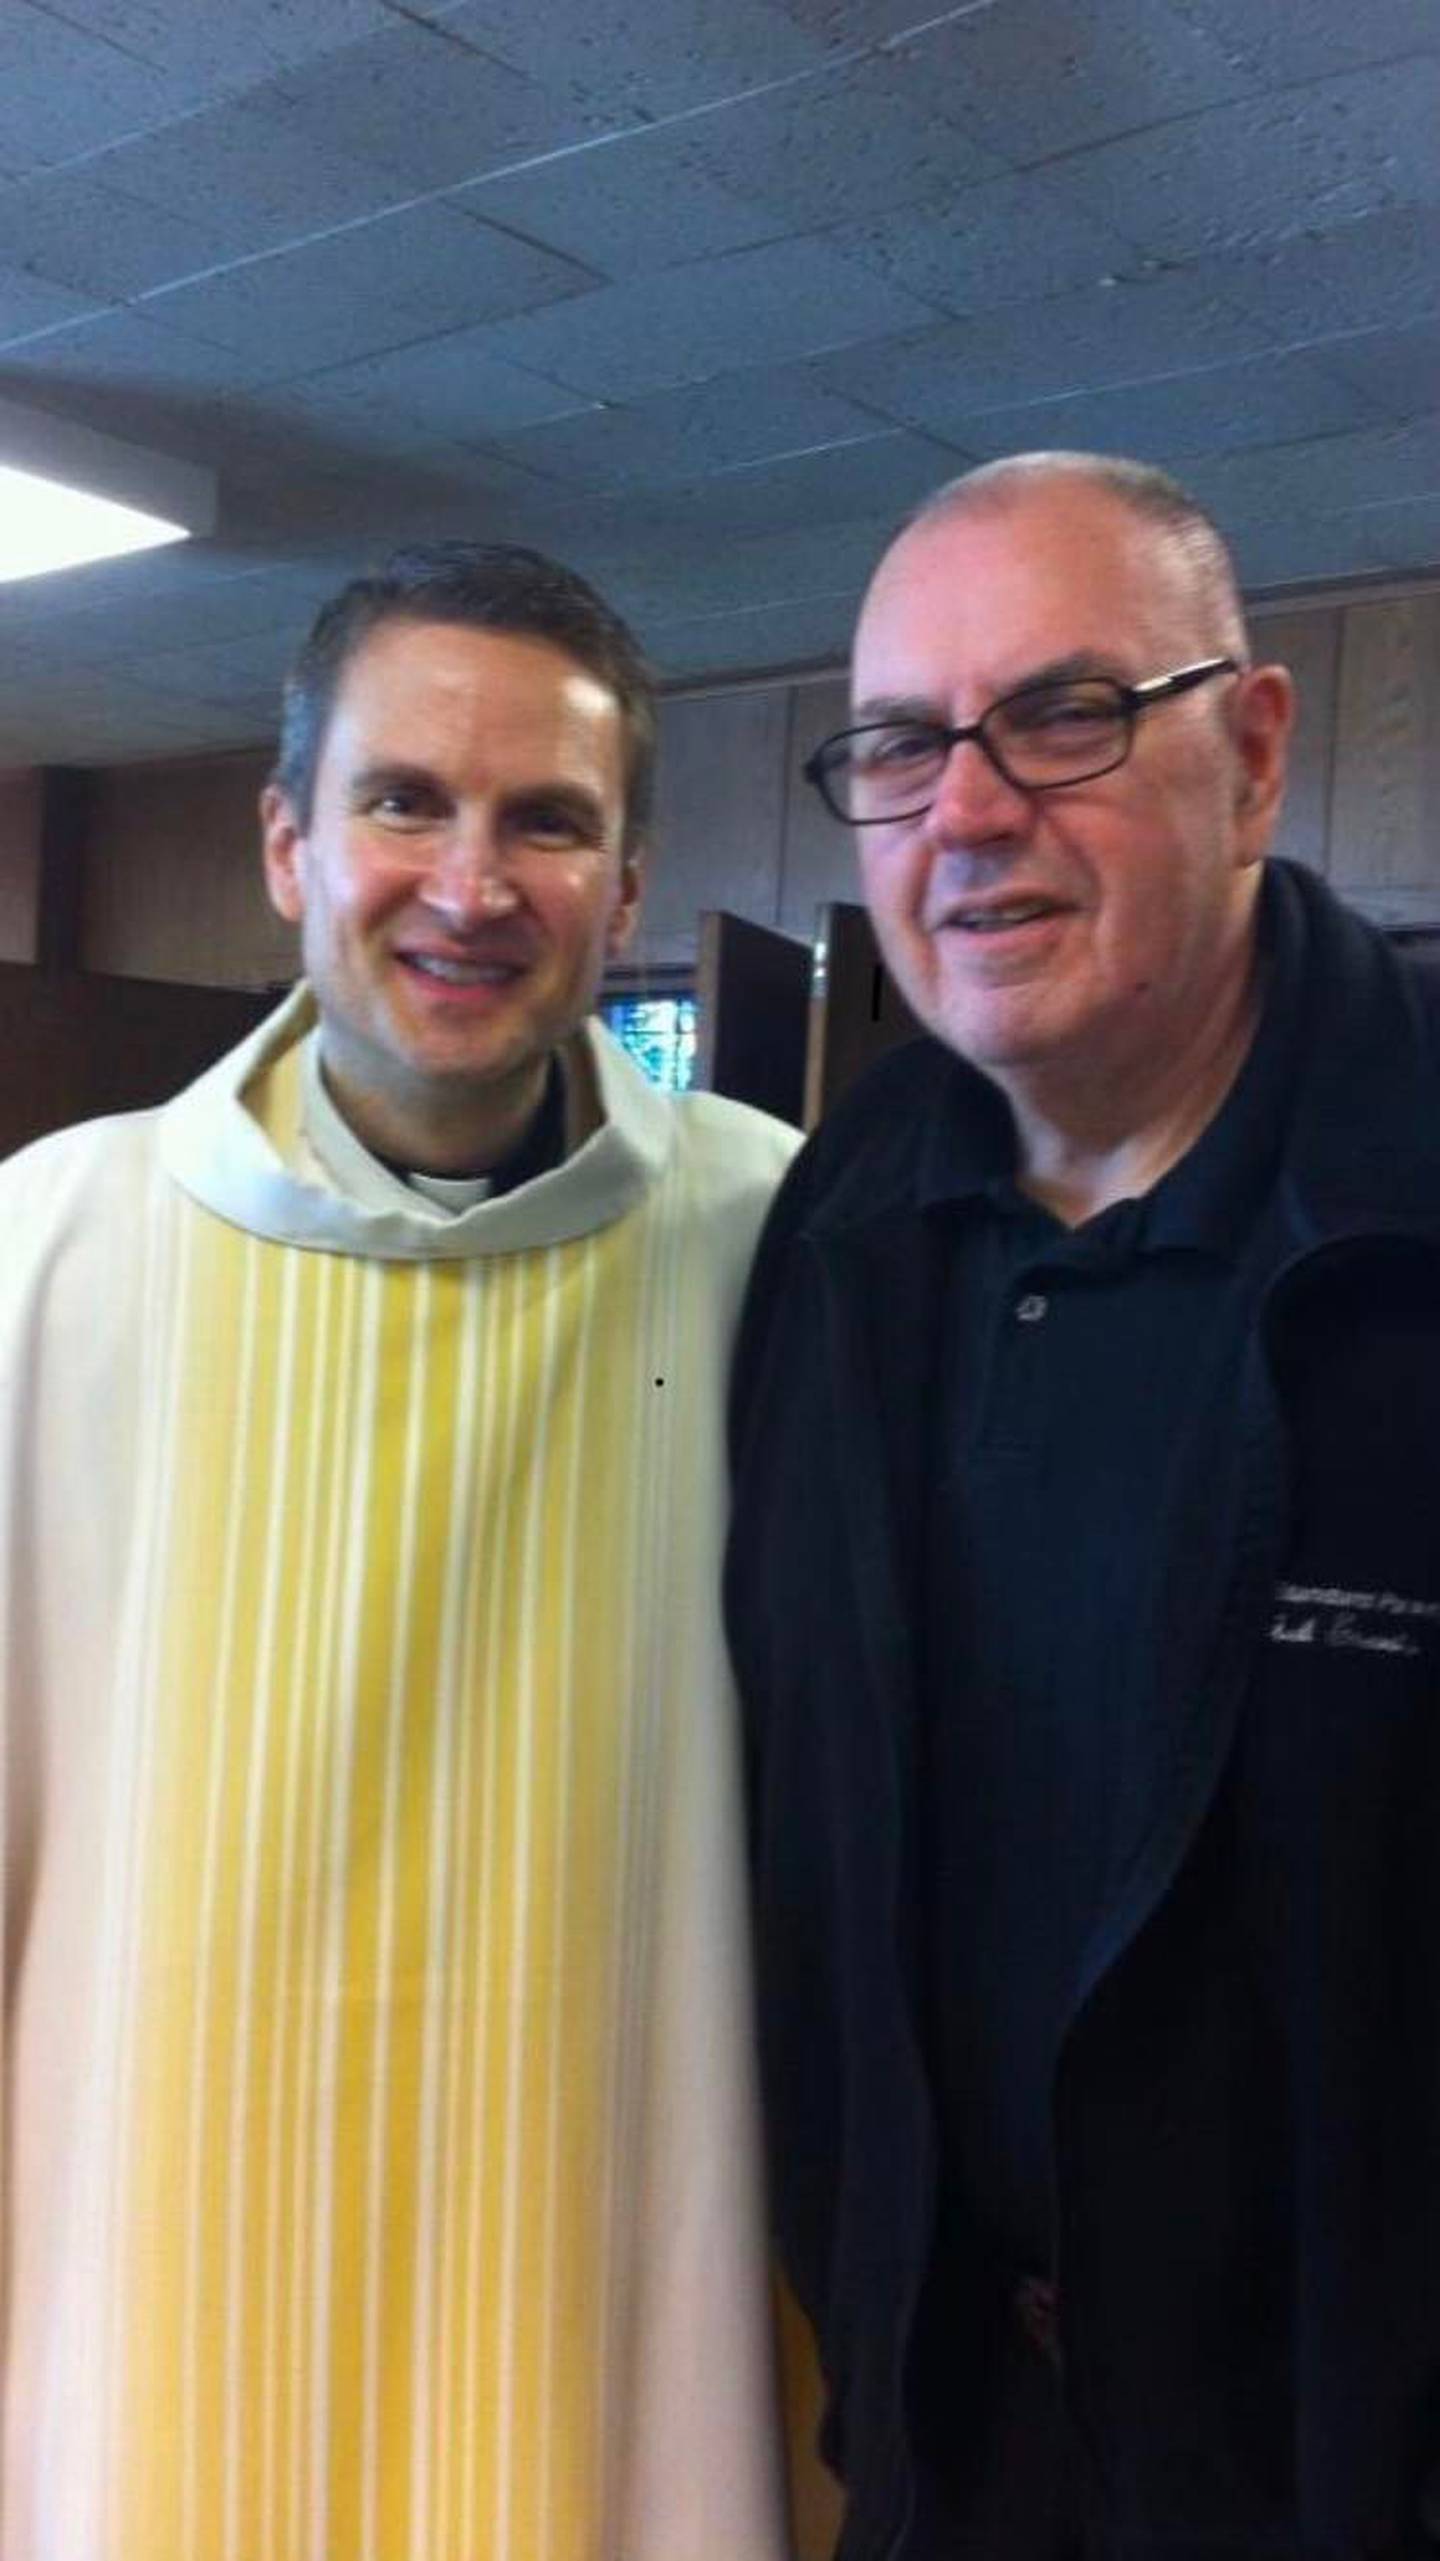 Most Rev. Ronald Hicks, bishop of the Diocese of Joliet, is seen with his former teacher, Richard Jaworowksi of Indiana.